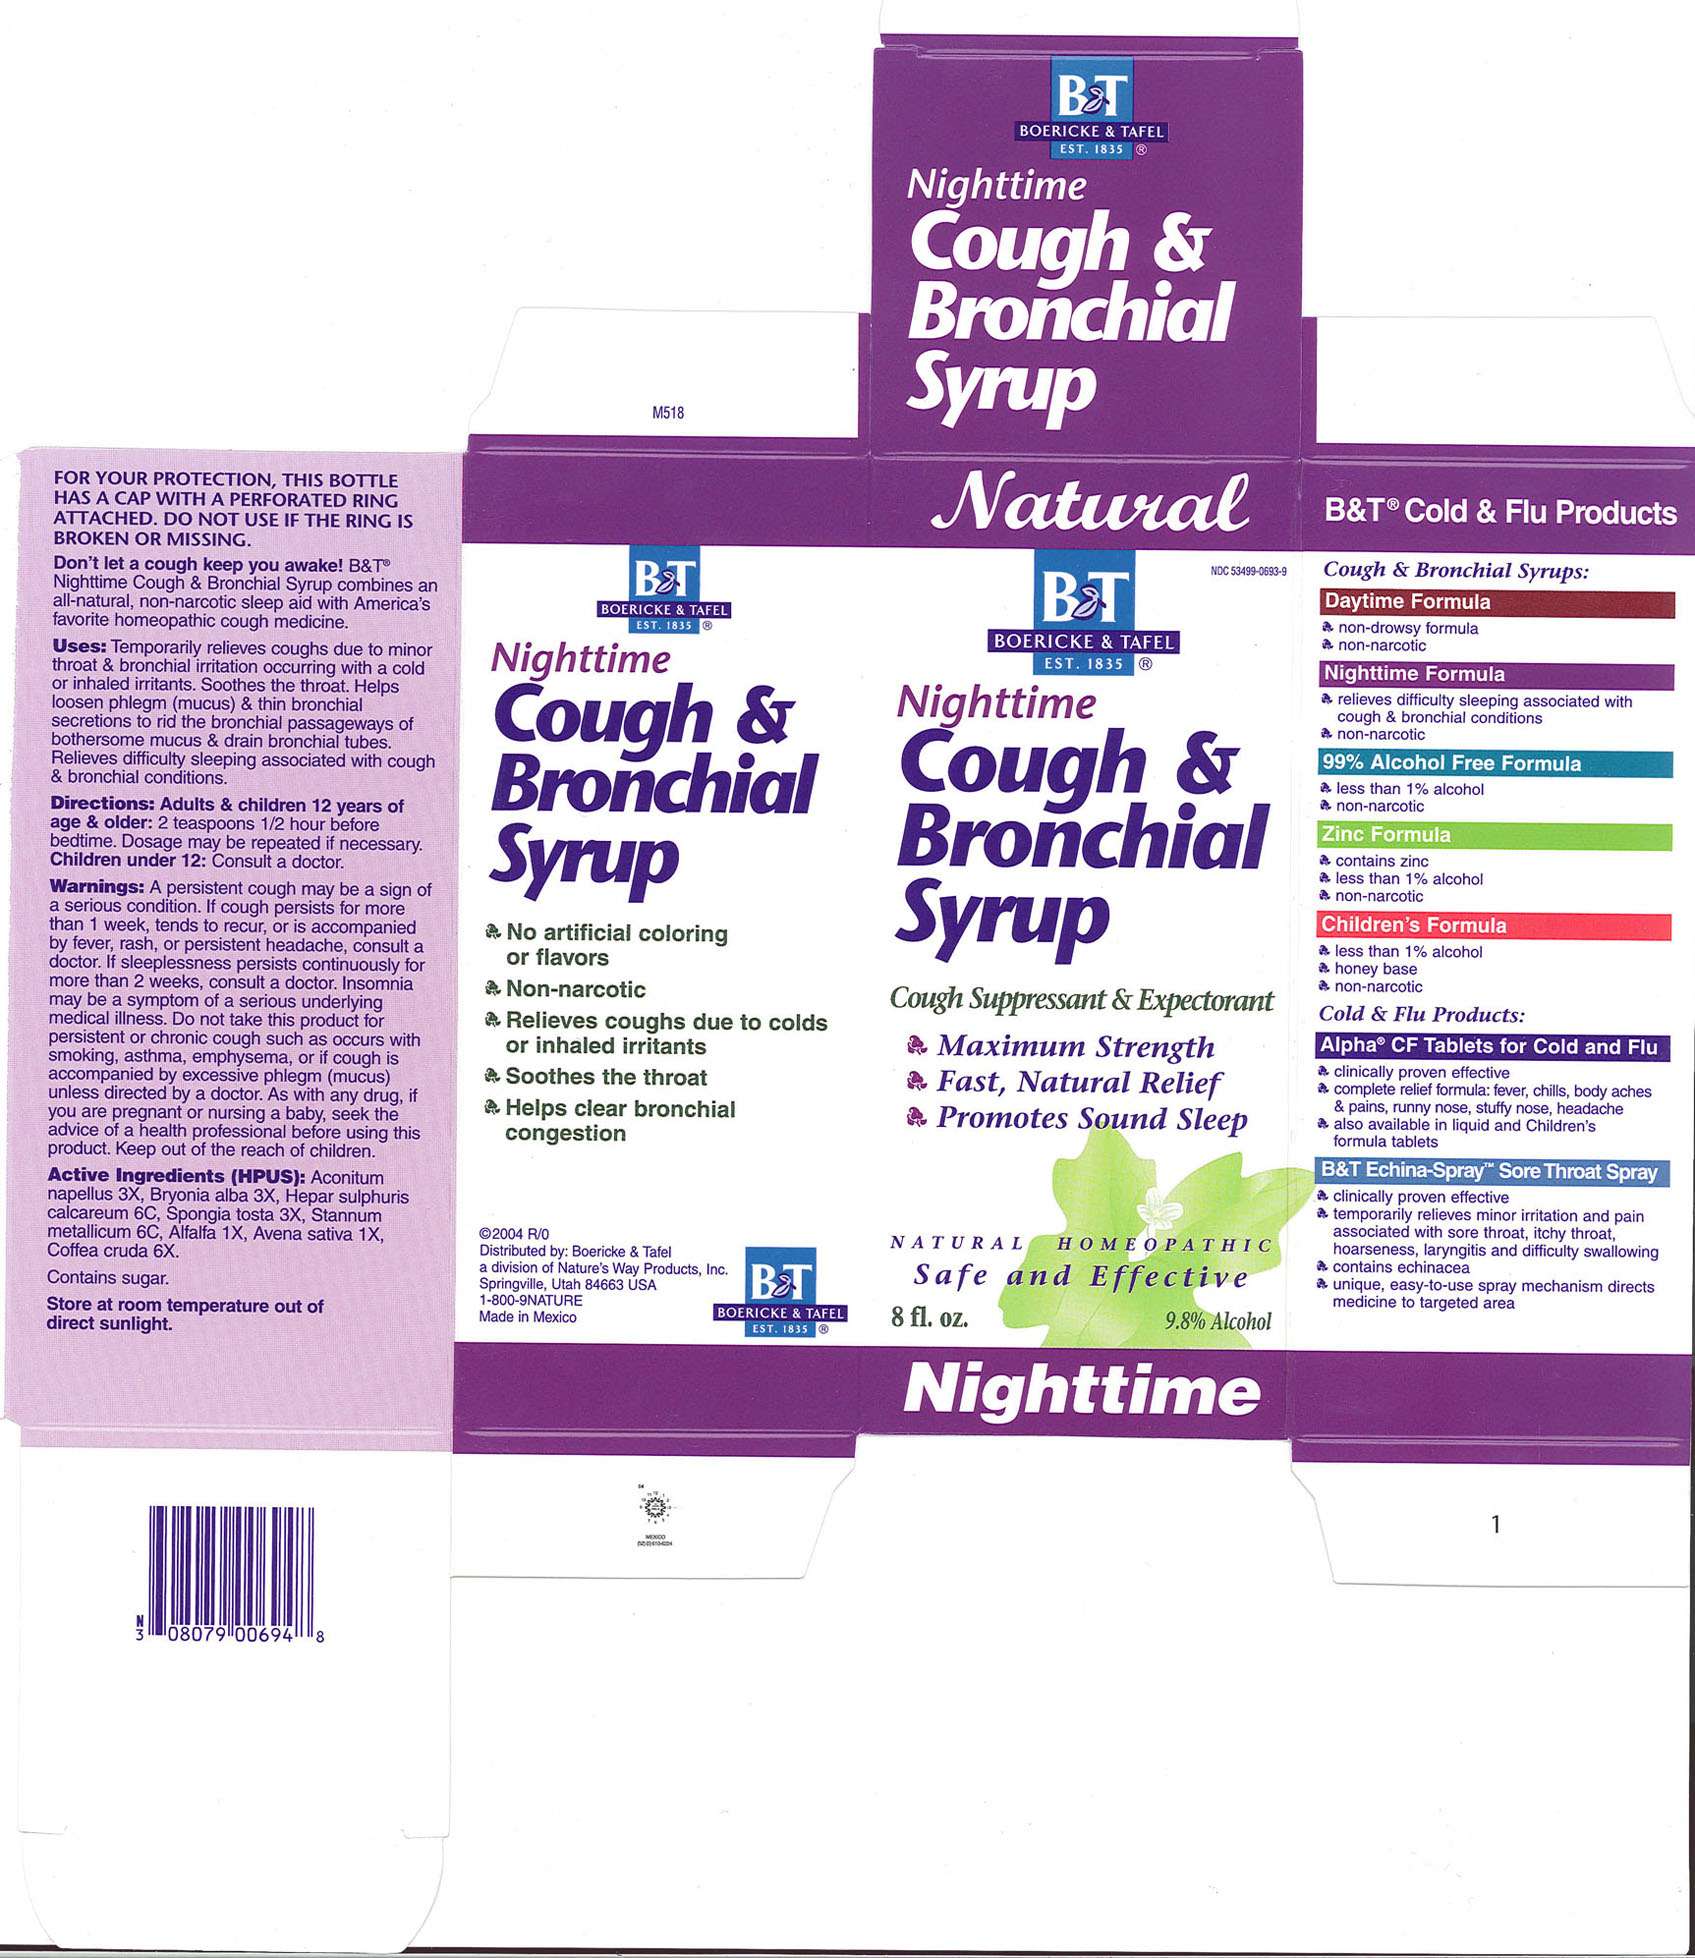 Nightime Cough and Bronchial